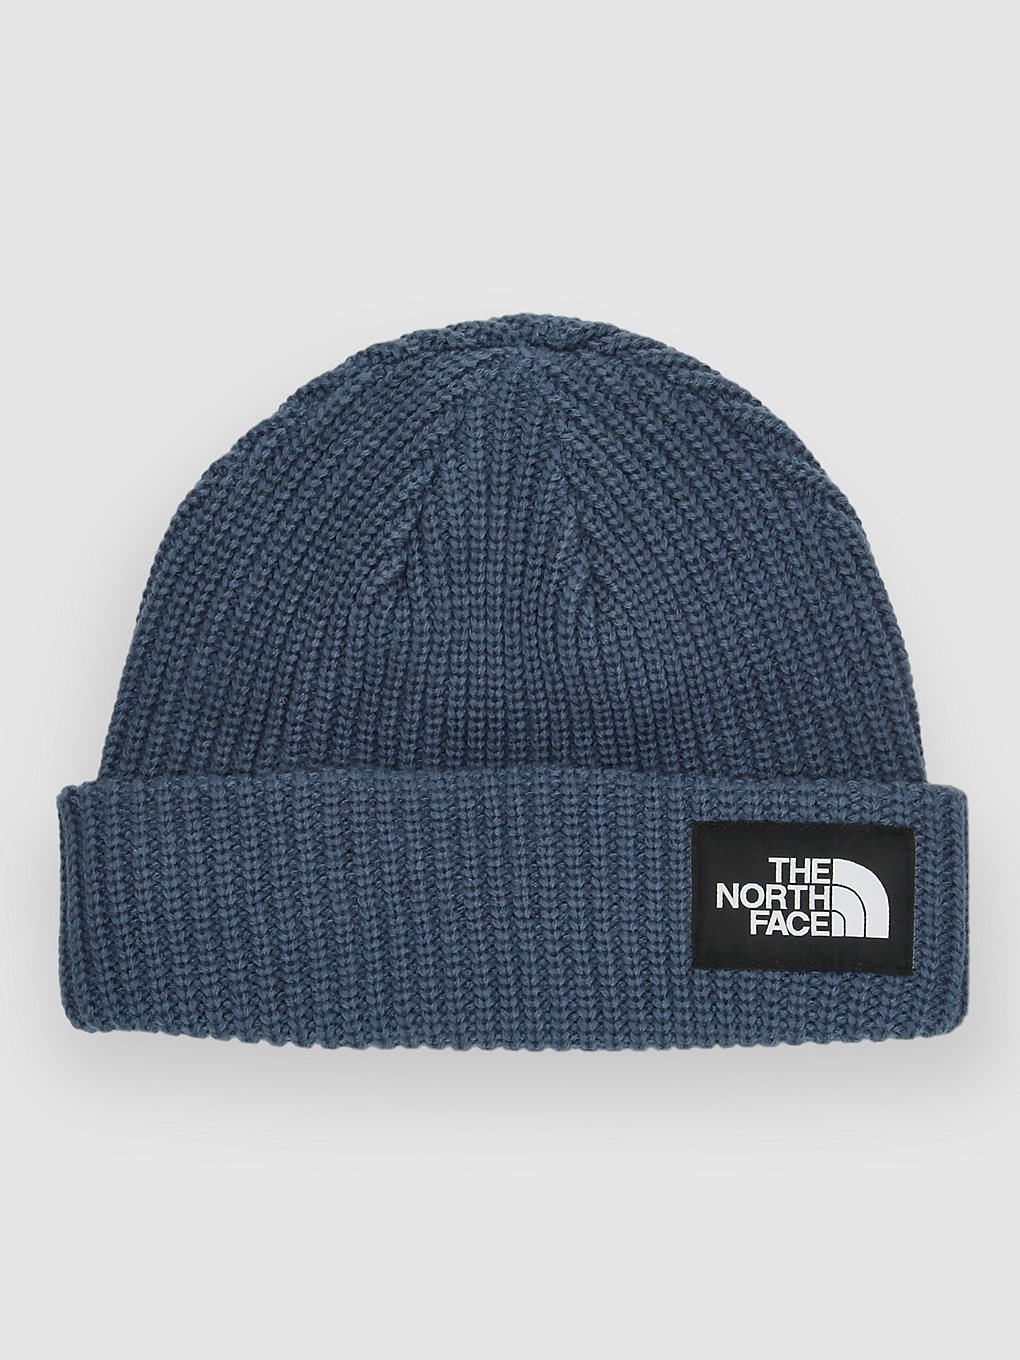 THE NORTH FACE Salty Dog Lined Beanie shady blue kaufen